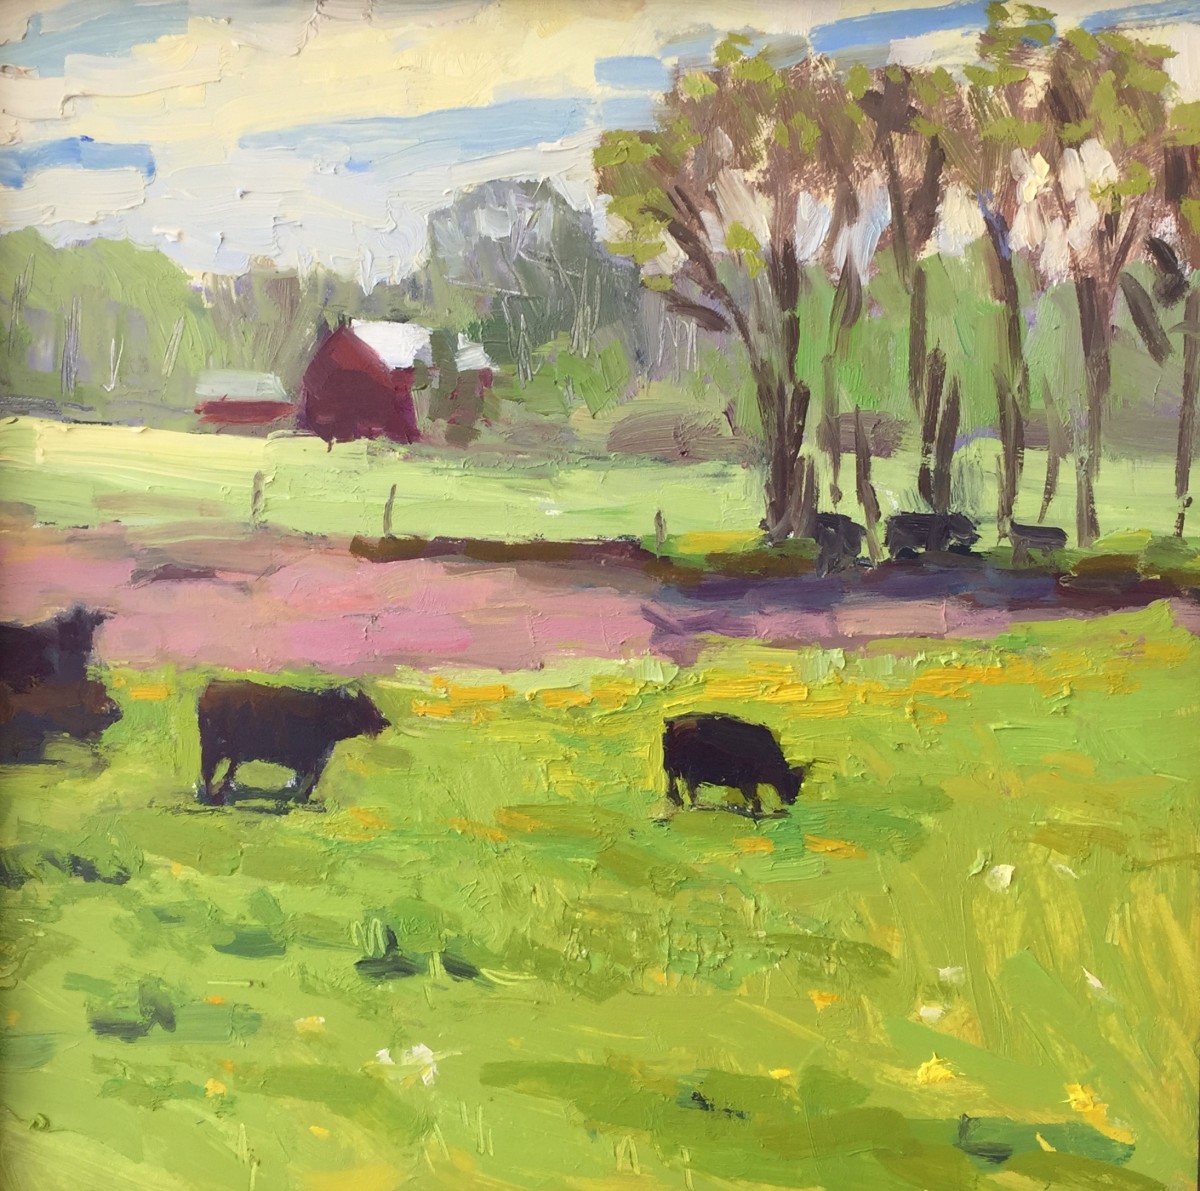 Cows in the Pasture at Dan youngs by carol strock wasson 